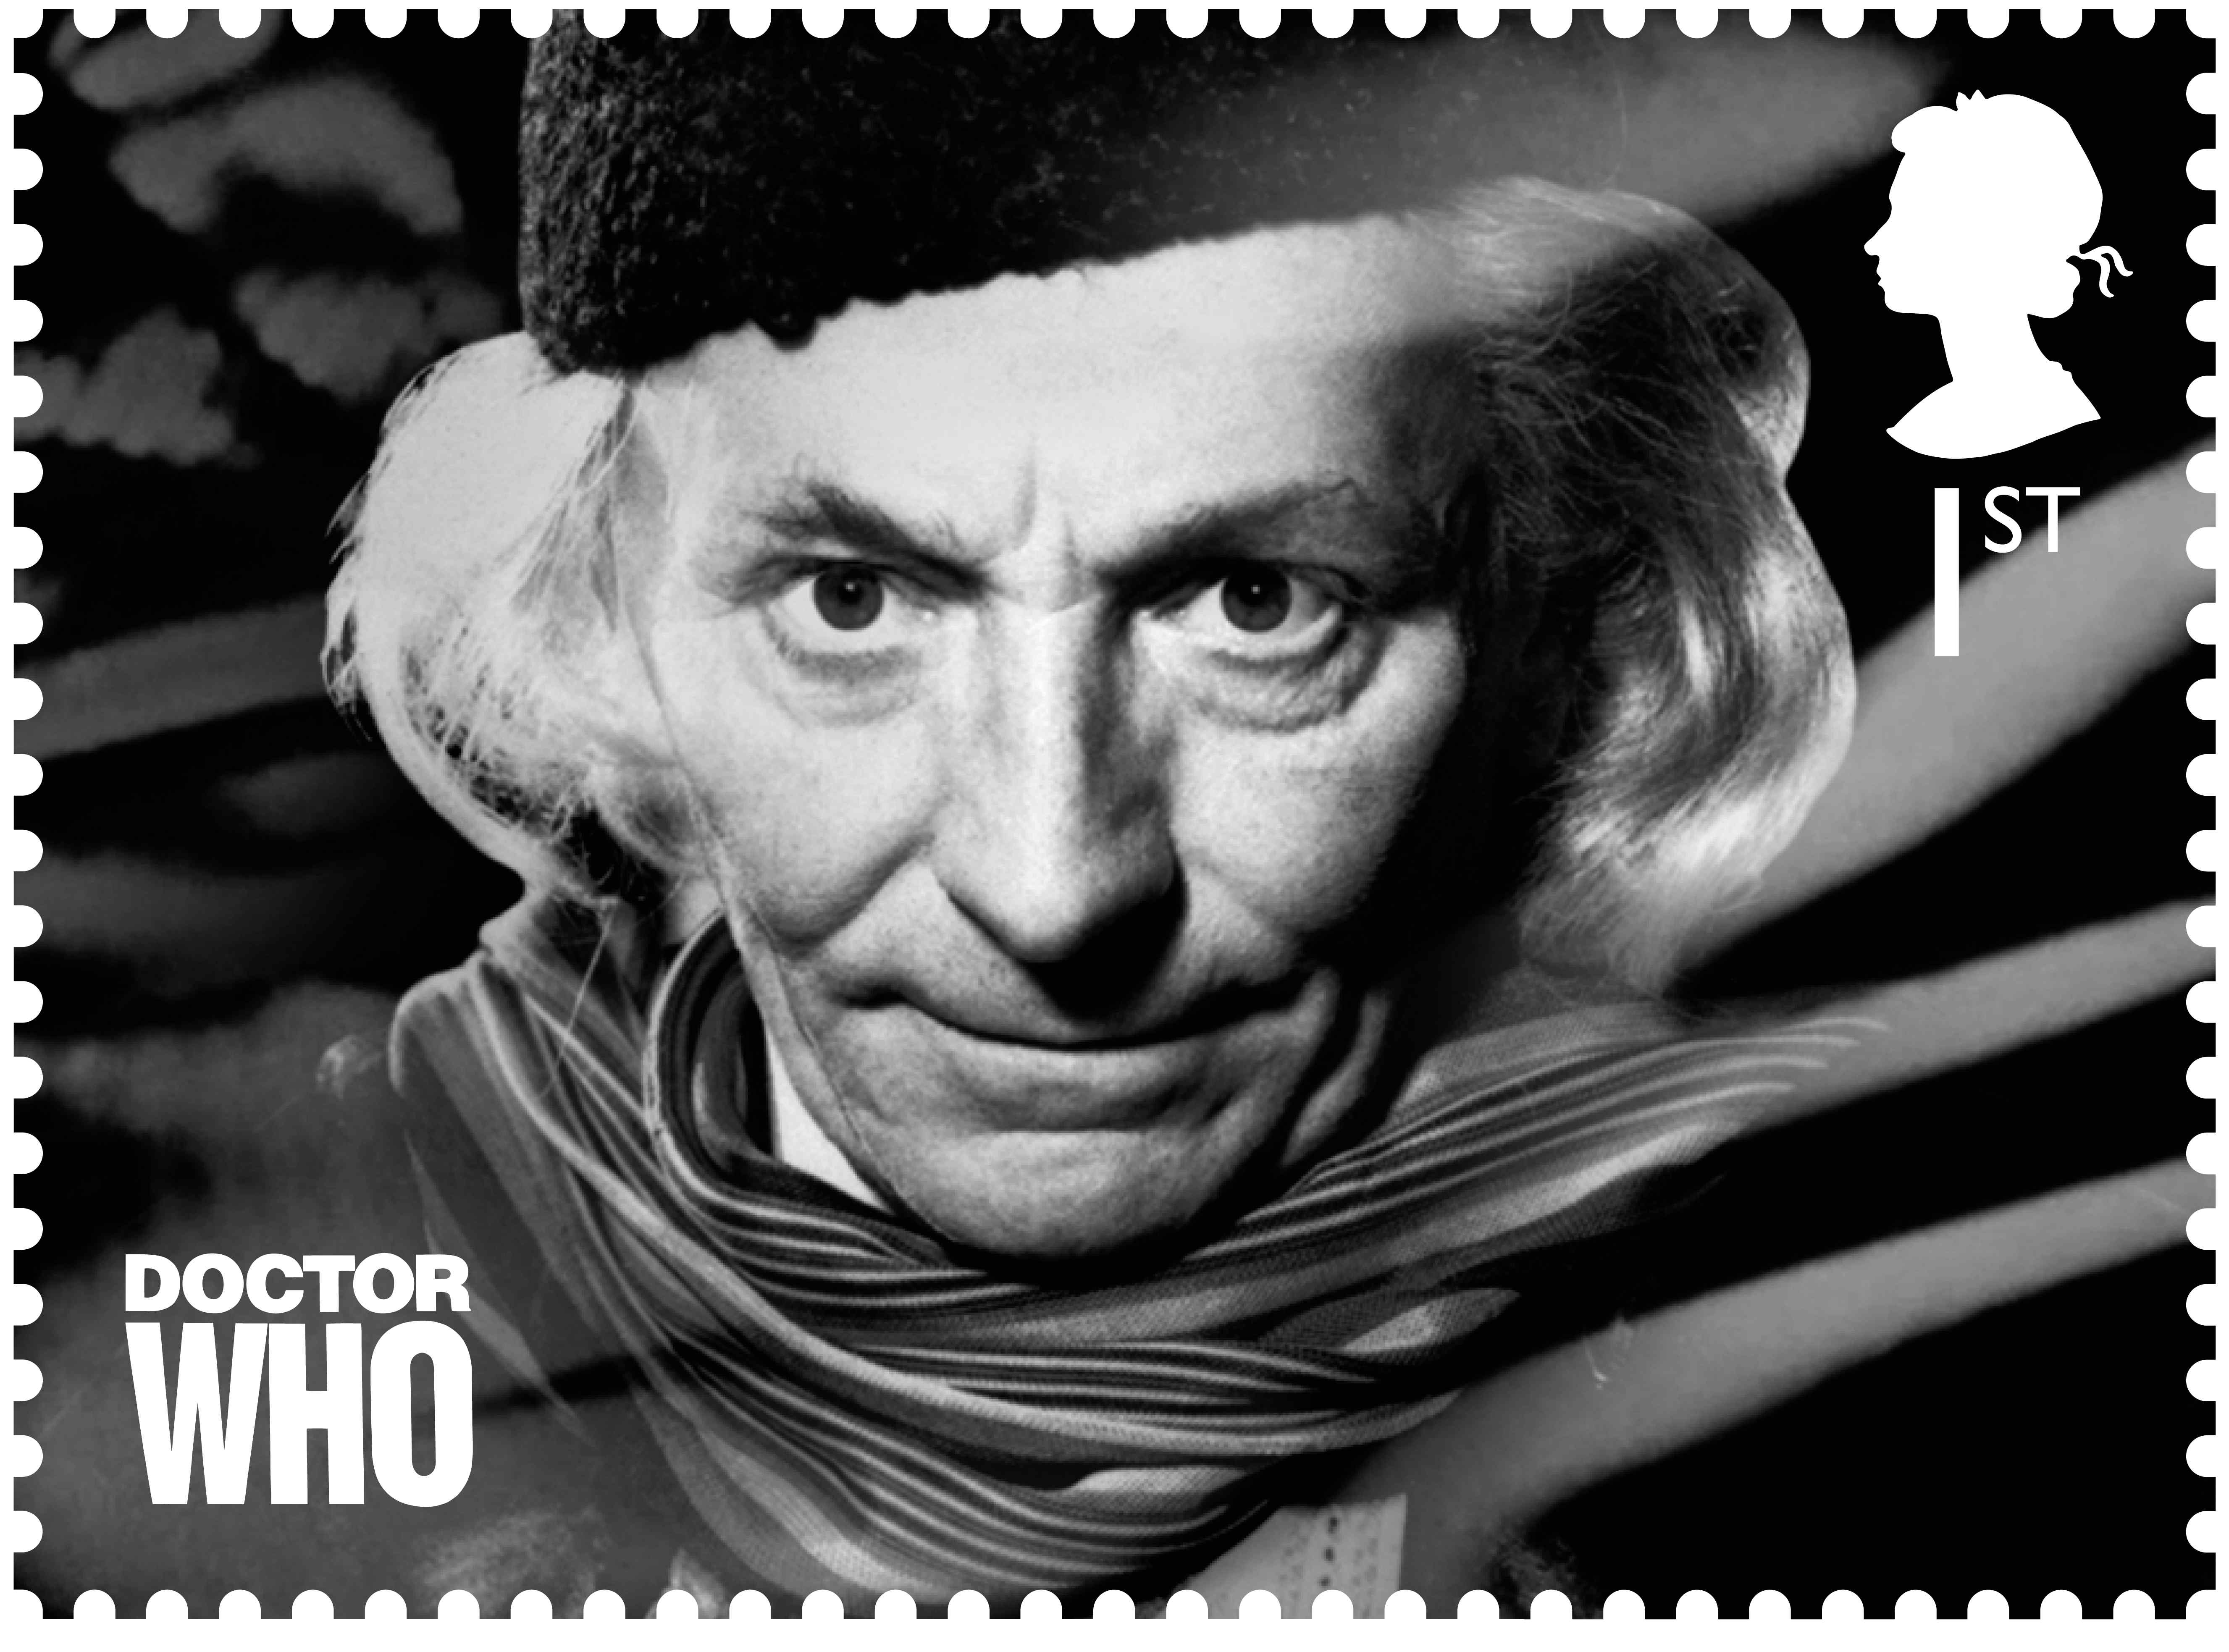 William Hartnell played the first ever Doctor back in 1963